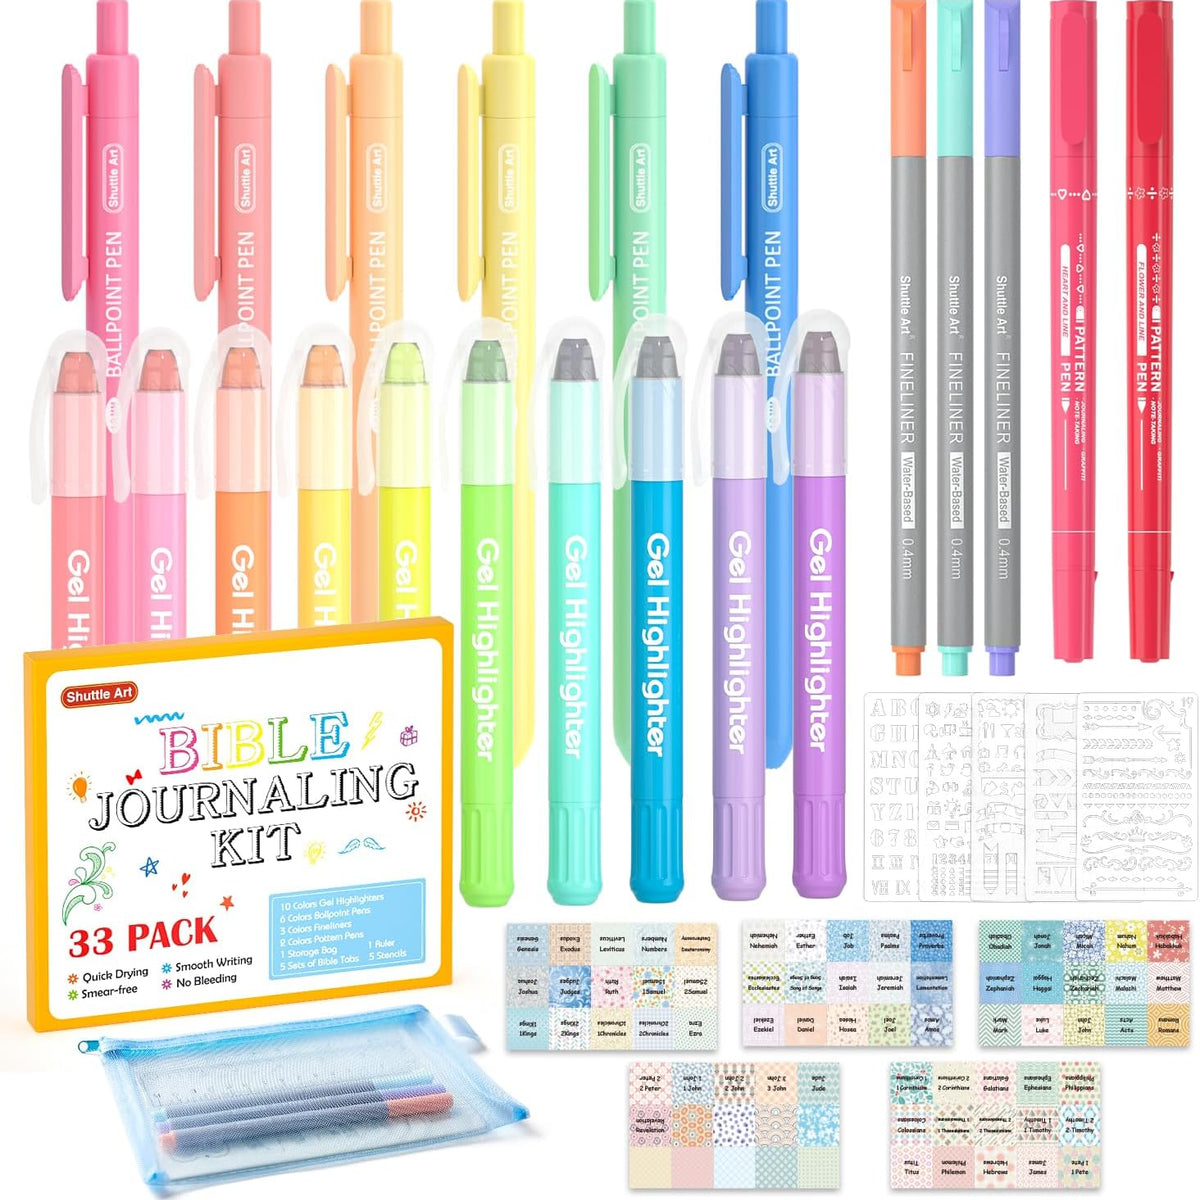  BLIEVE - Bible Journaling Kit With Gel Highlighters